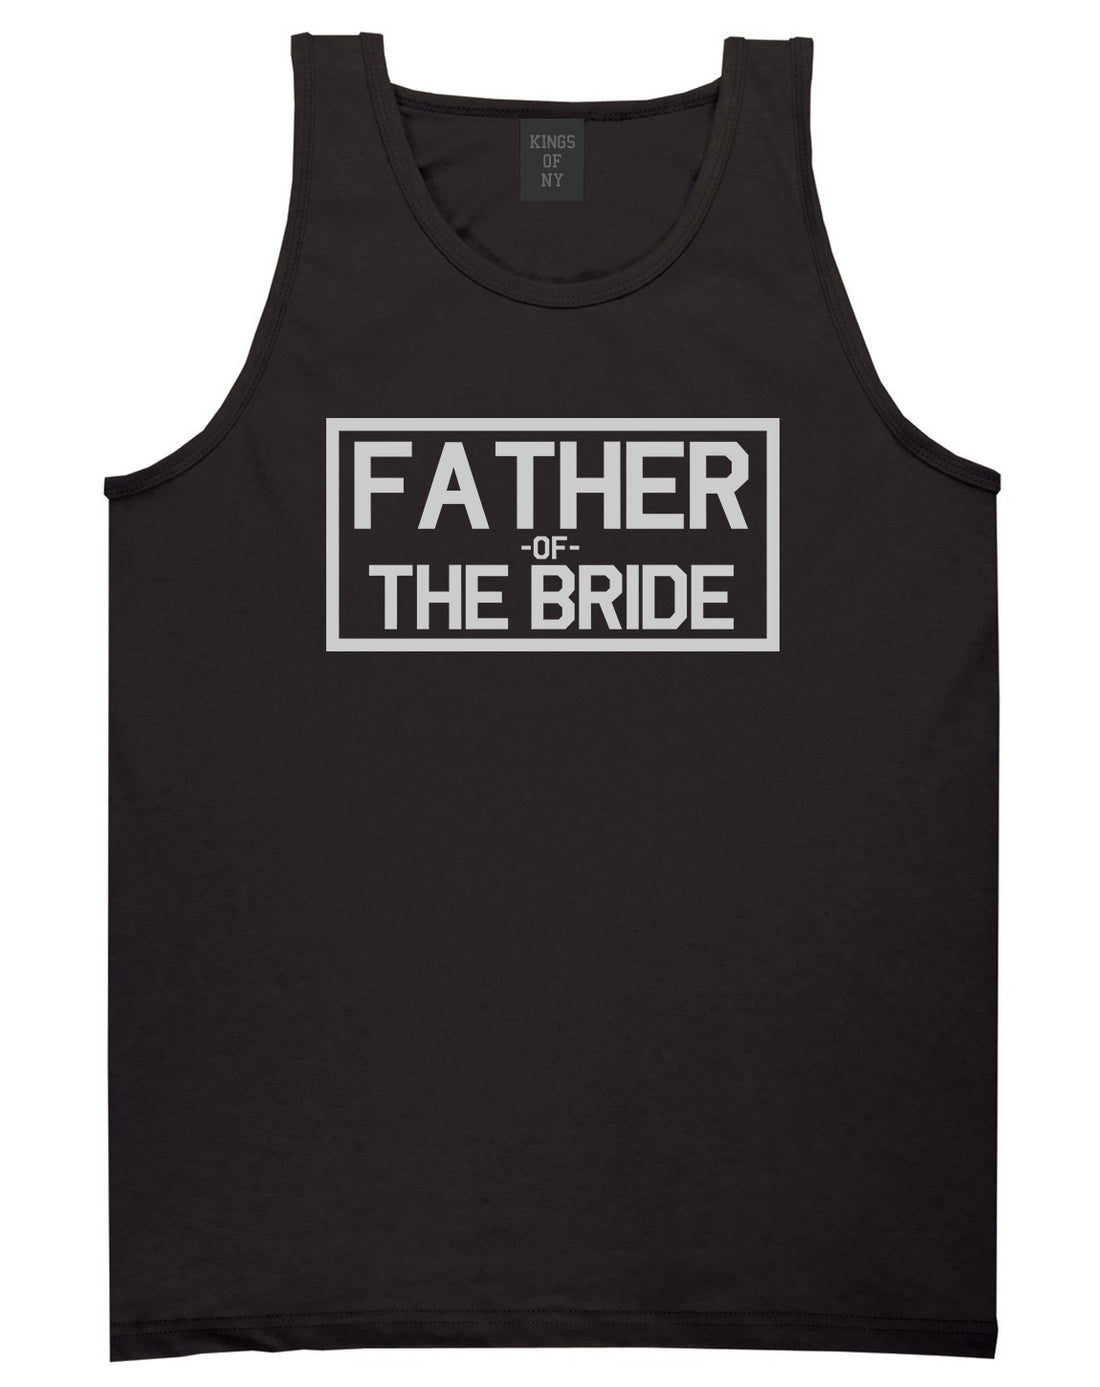 Father_Of_The_Bride Mens Black Tank Top Shirt by Kings Of NY